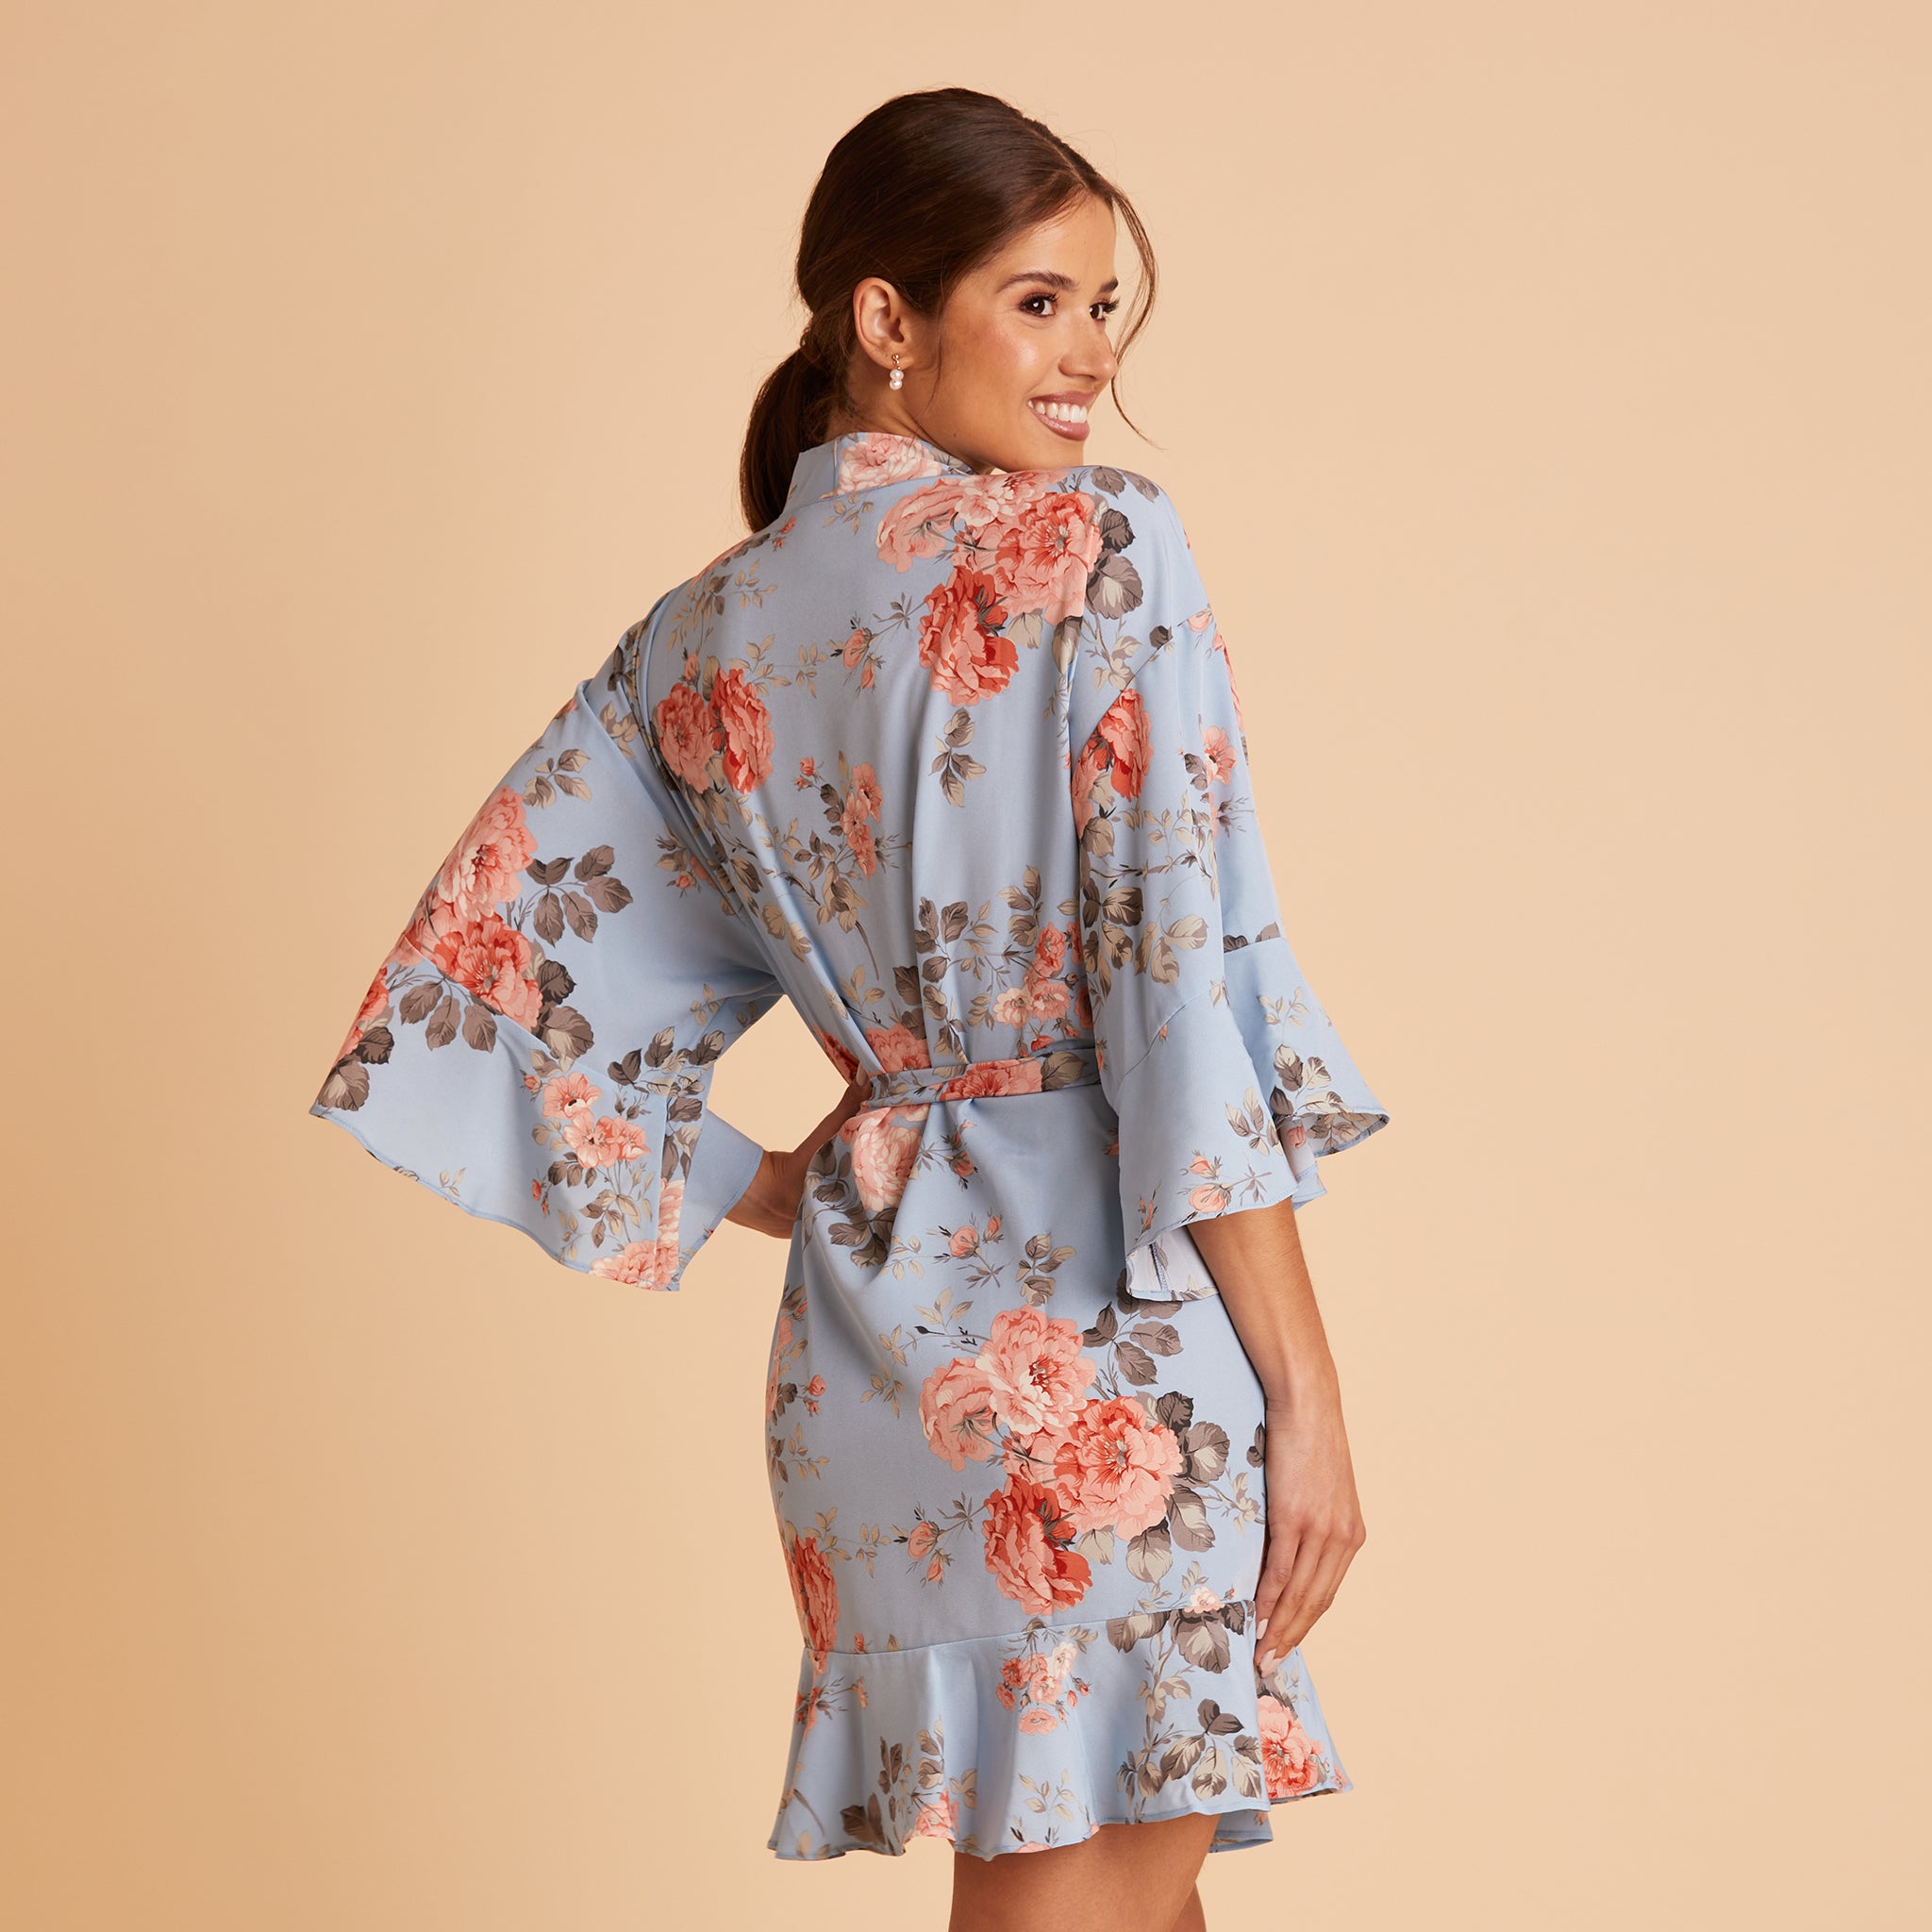 Kenny Ruffle Robe in Dusty Blue Floral by Birdy Grey, side view